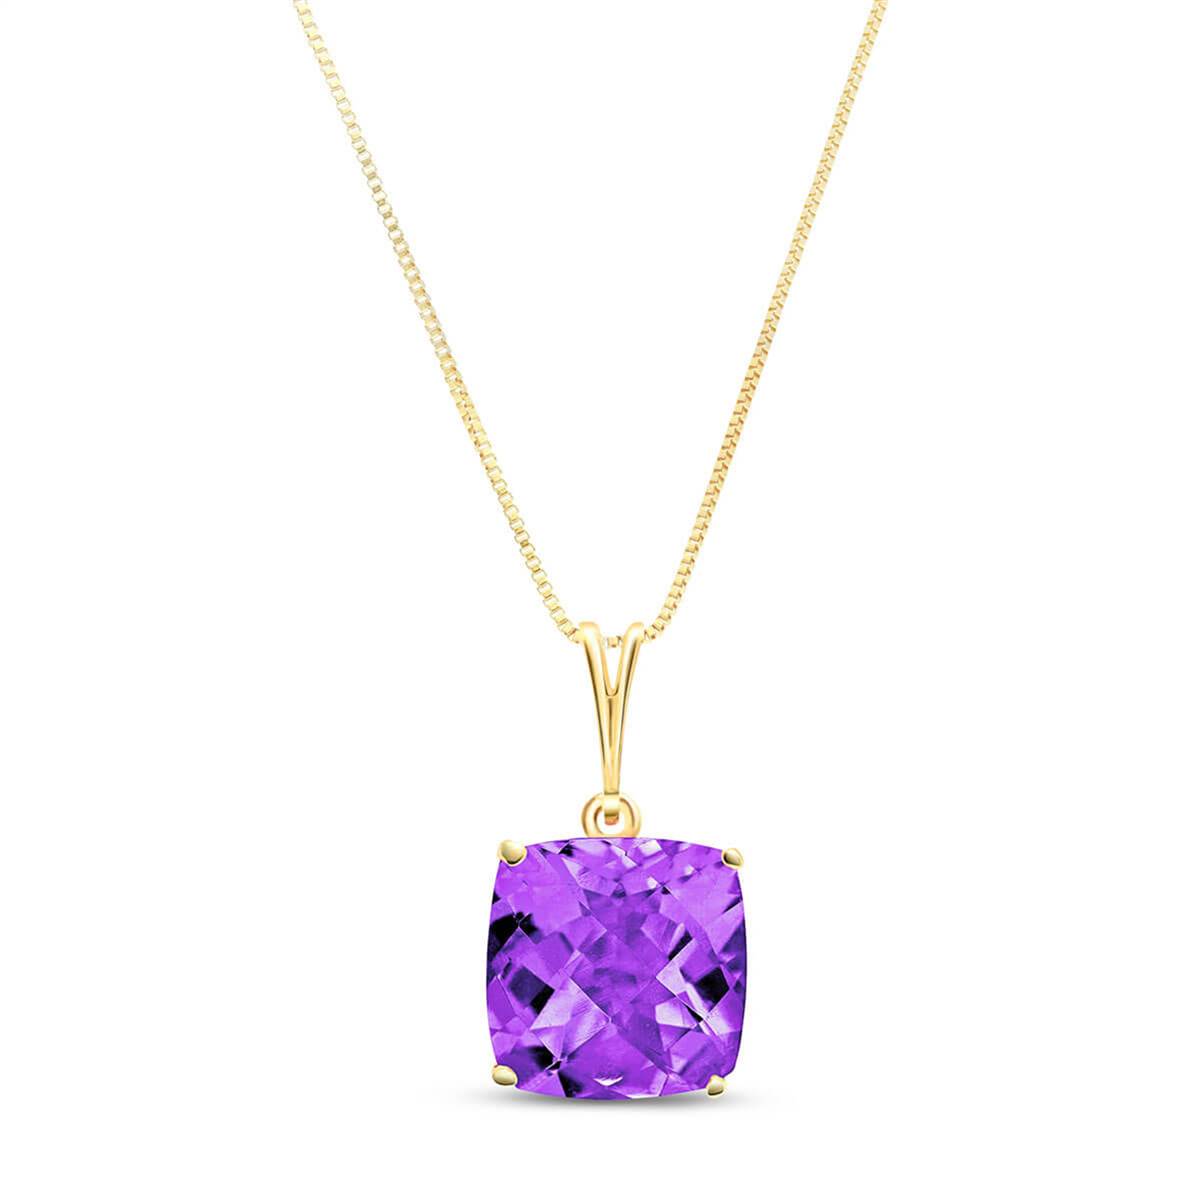 3.6 Carat 14K Solid Yellow Gold Necklace Natural Checkerboard Cut Purple Amethyst